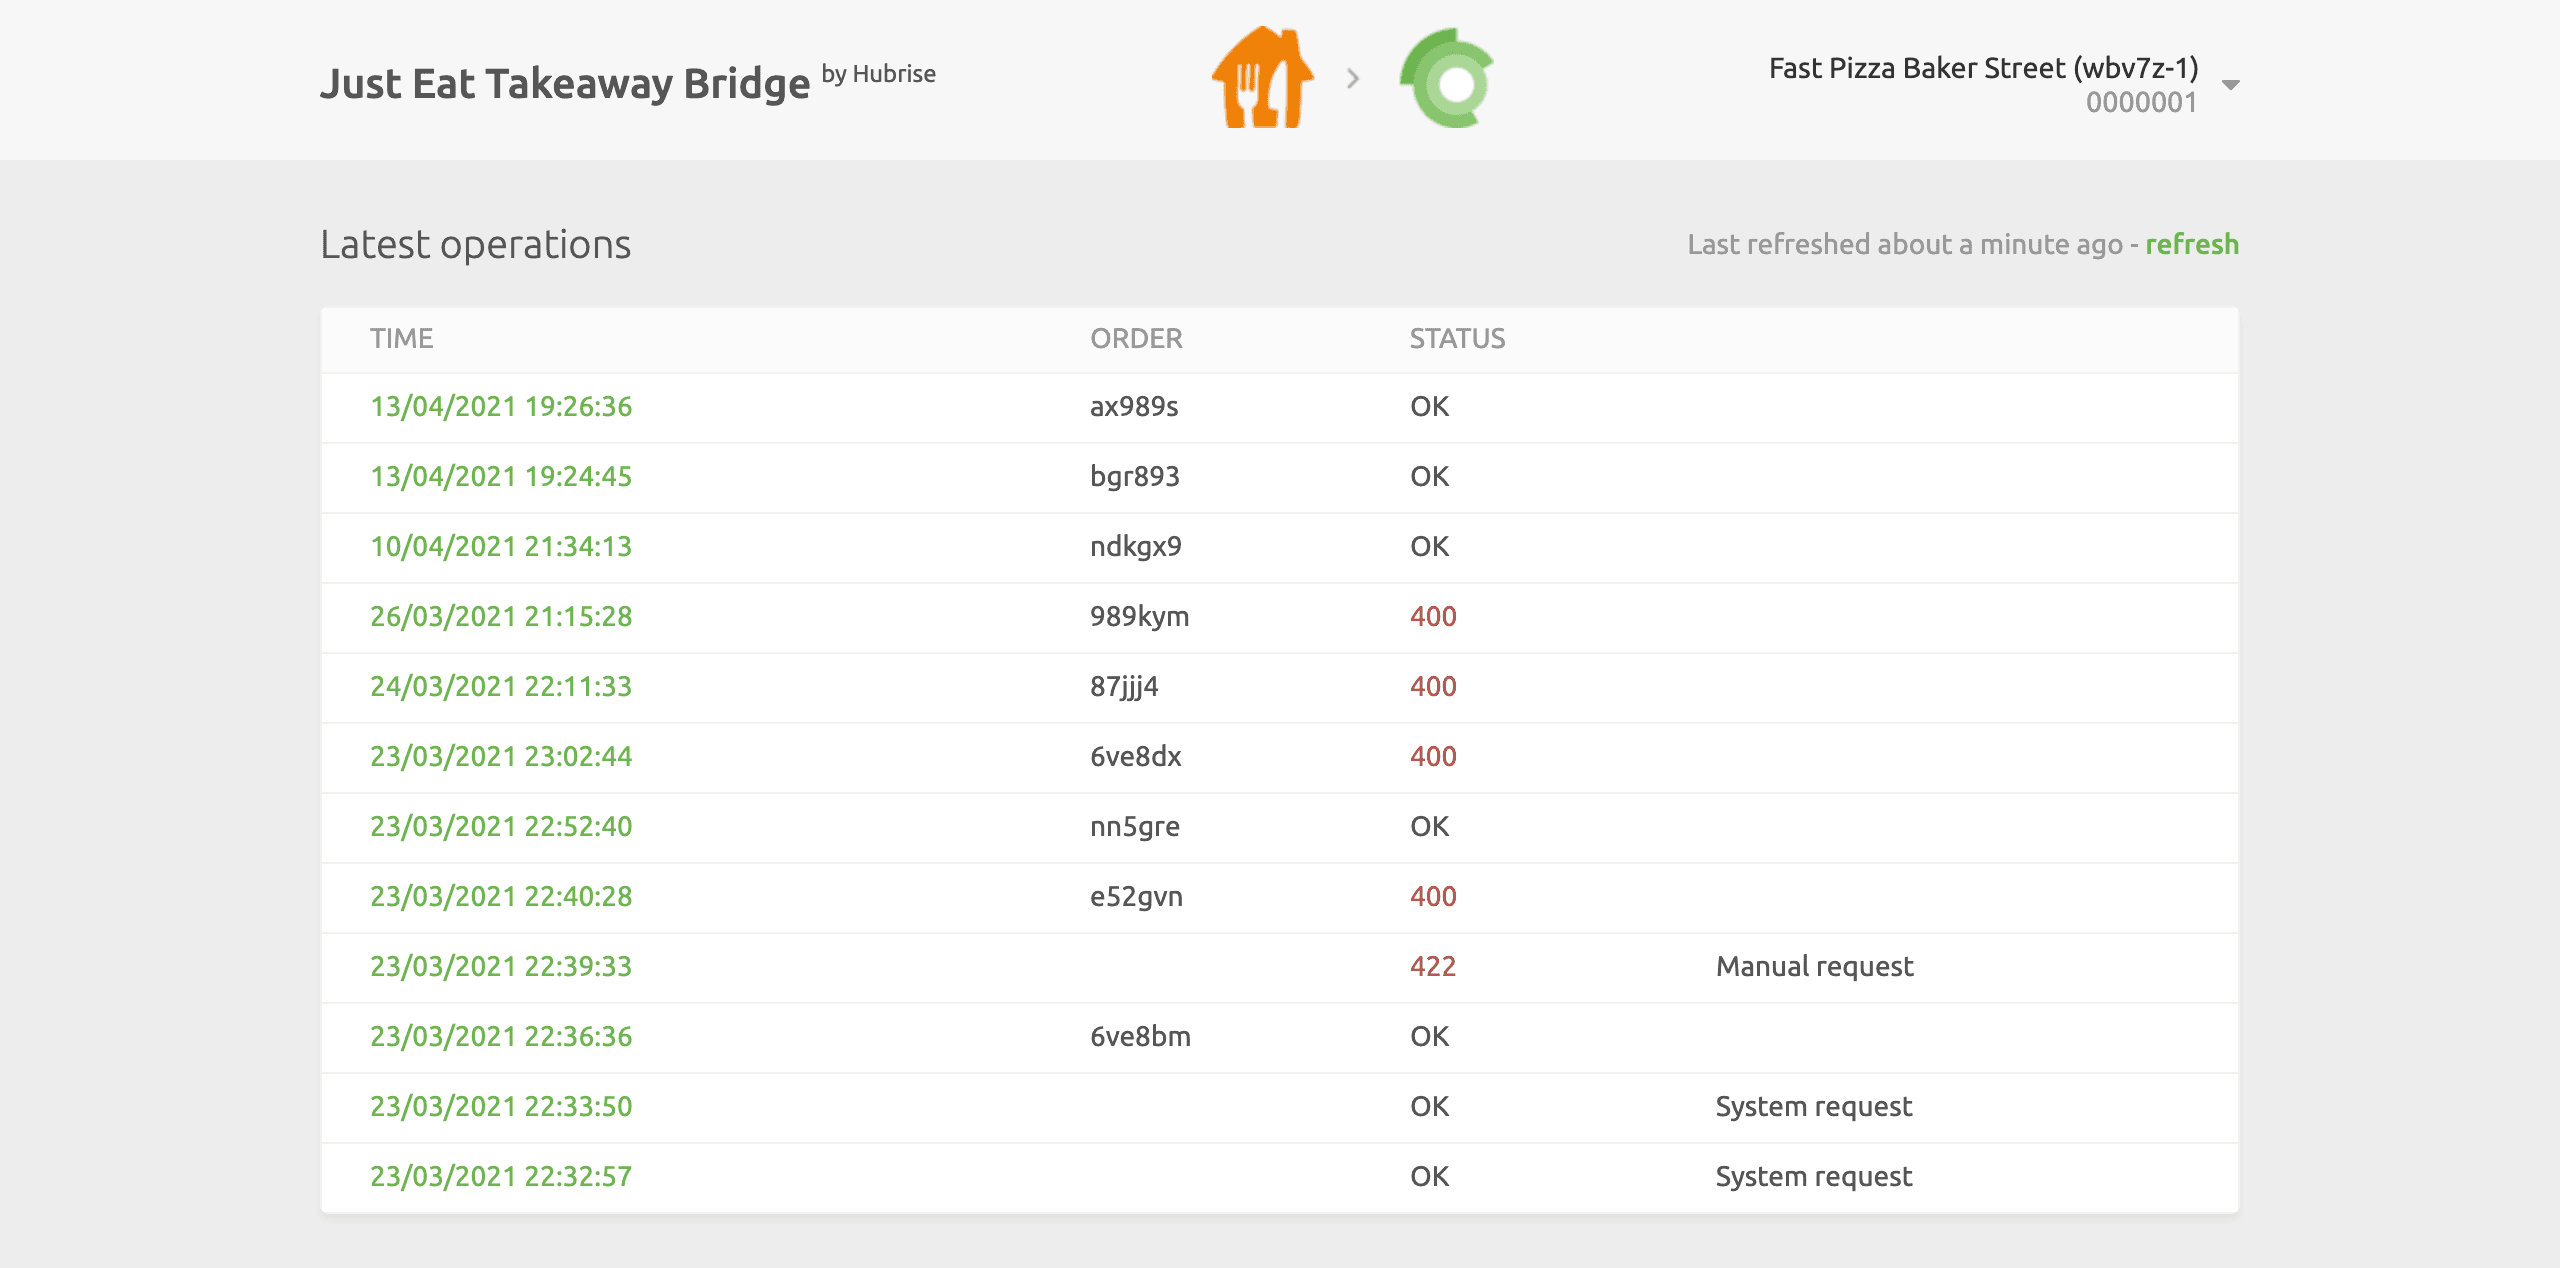 Operations page of Just Eat Takeaway Bridge developed by HubRise